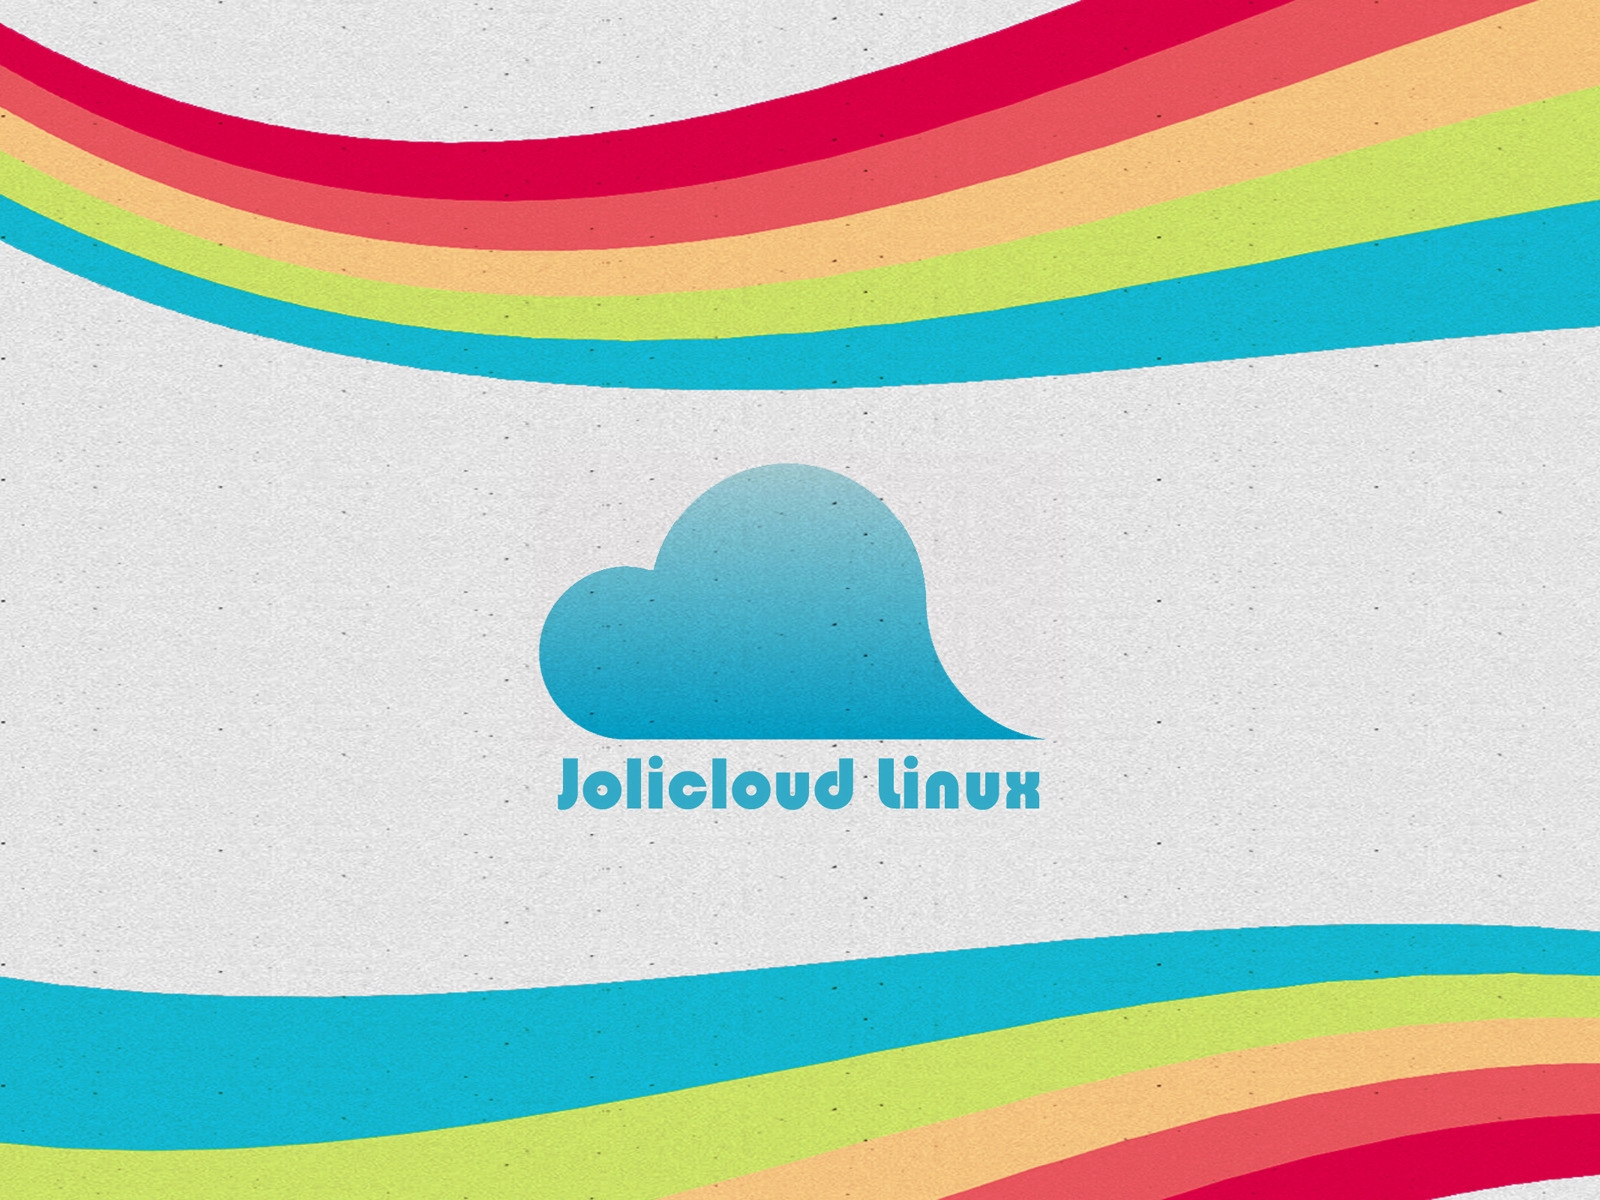 Jolicloud Linux for 1600 x 1200 resolution